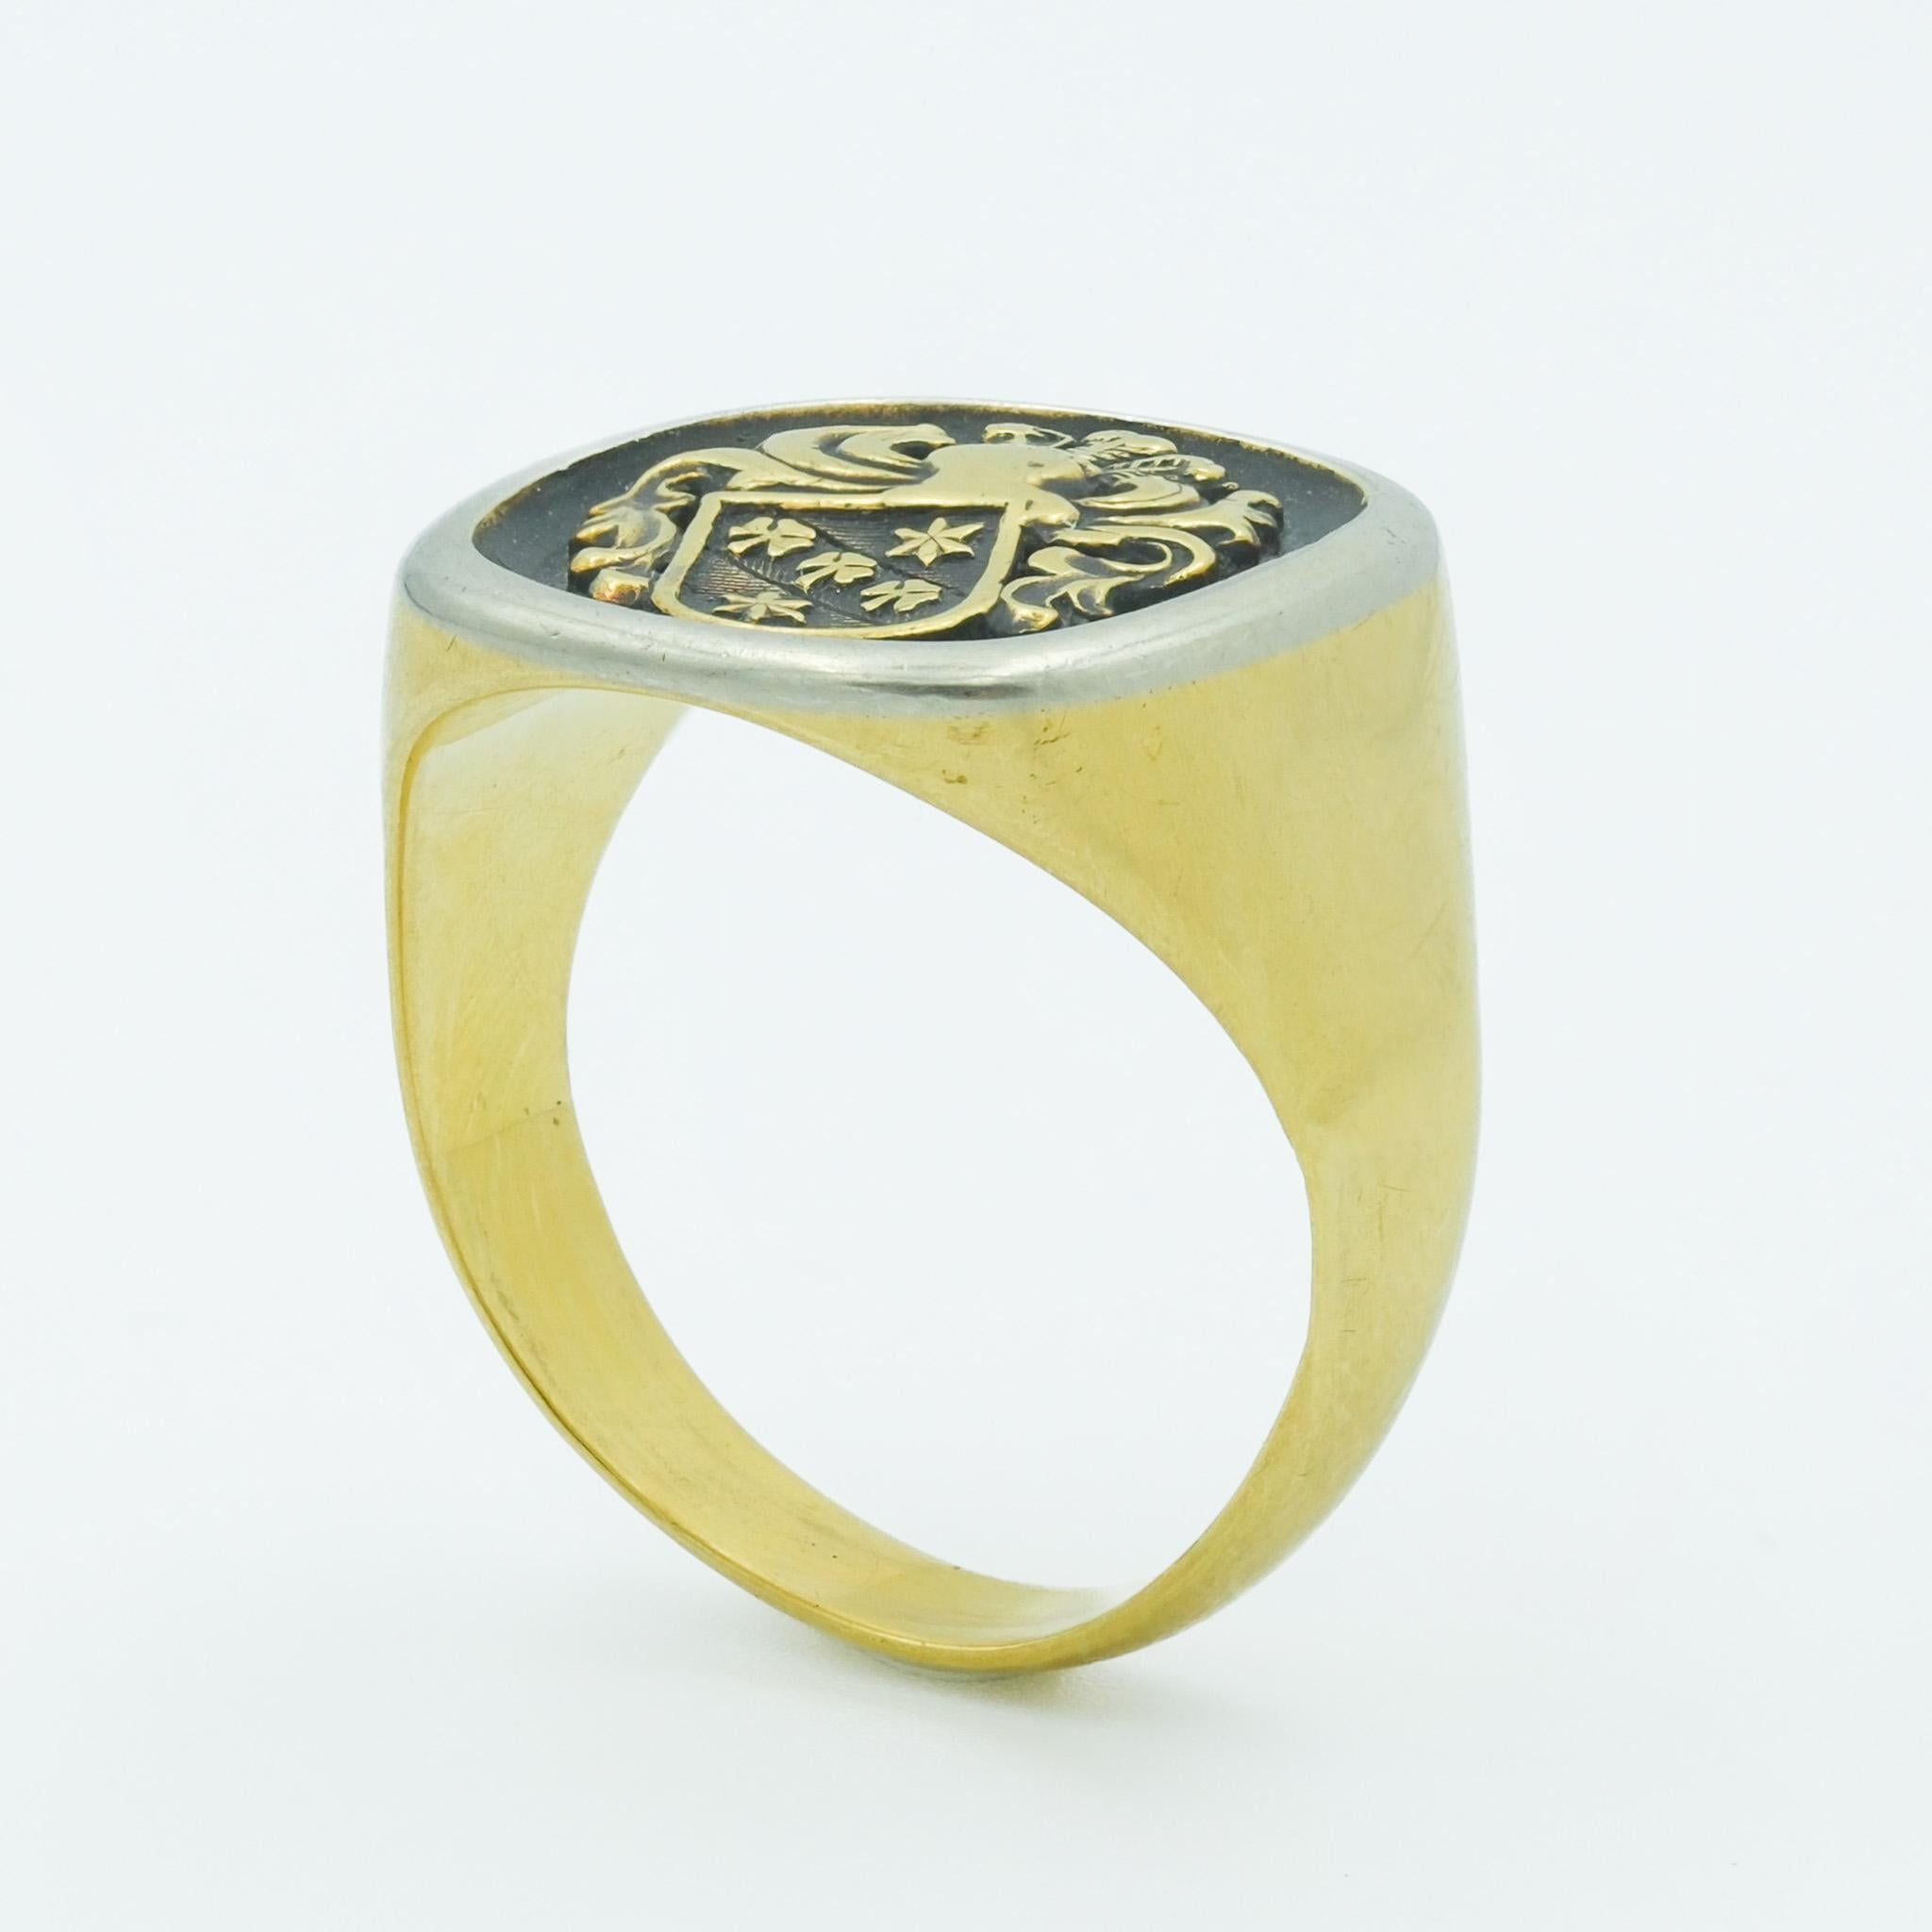 This vintage 18 karat yellow and silver accent signet ring is emblematic of historical significance and personal identity. The centerpiece is a crest, meticulously engraved and filled with a likely resin-based black ink or paint, which in times past